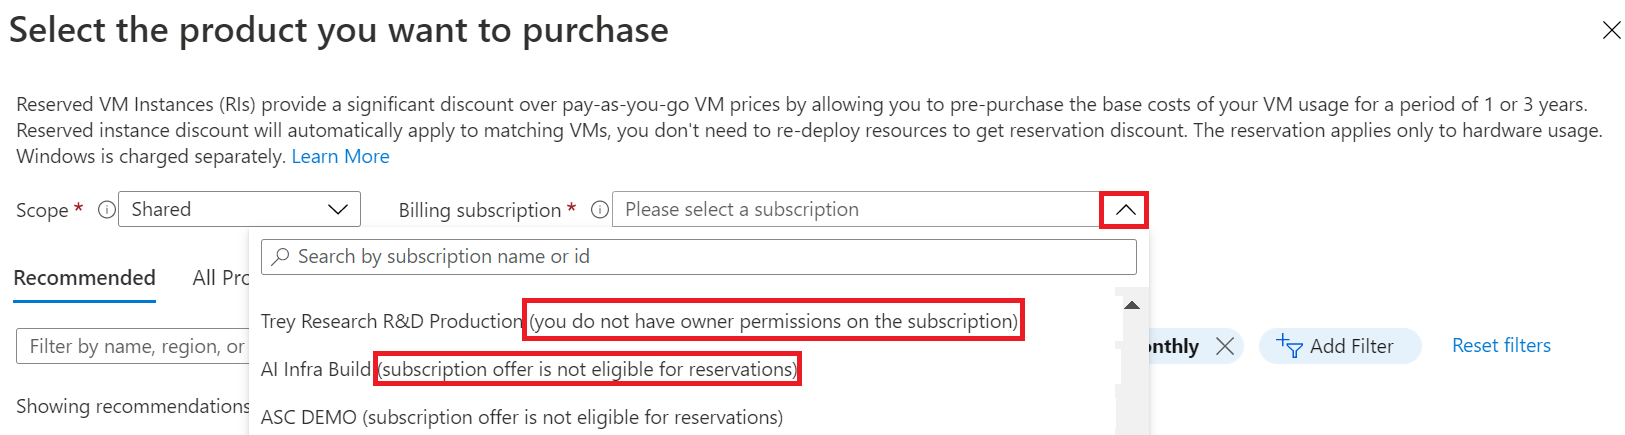 Example showing why a reservation can't be purchased